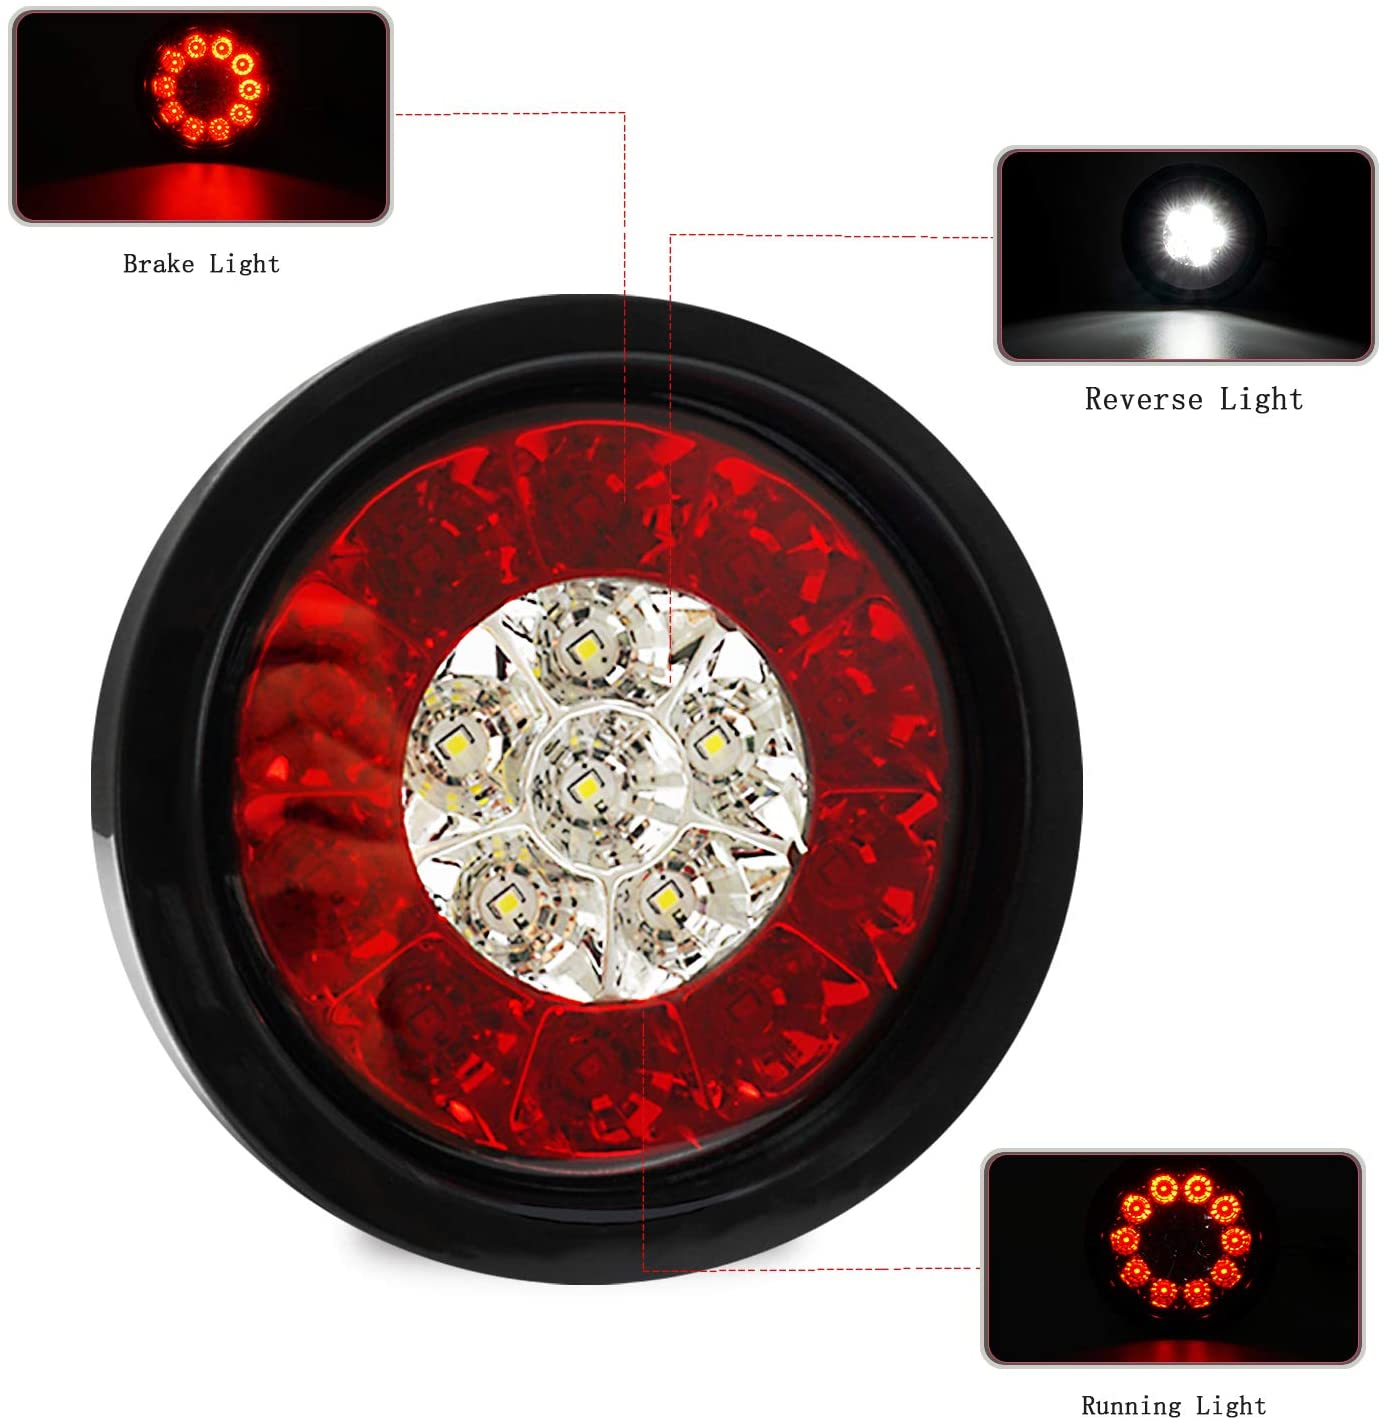 Auovo Round LED Truck Trailer White/Red Taillights with Stainless Steel Rings DC 12V Waterproof Stop Brake Running Reverse Backup Lights Tail Lamps for RV Trailer 2 Pcs Red/White